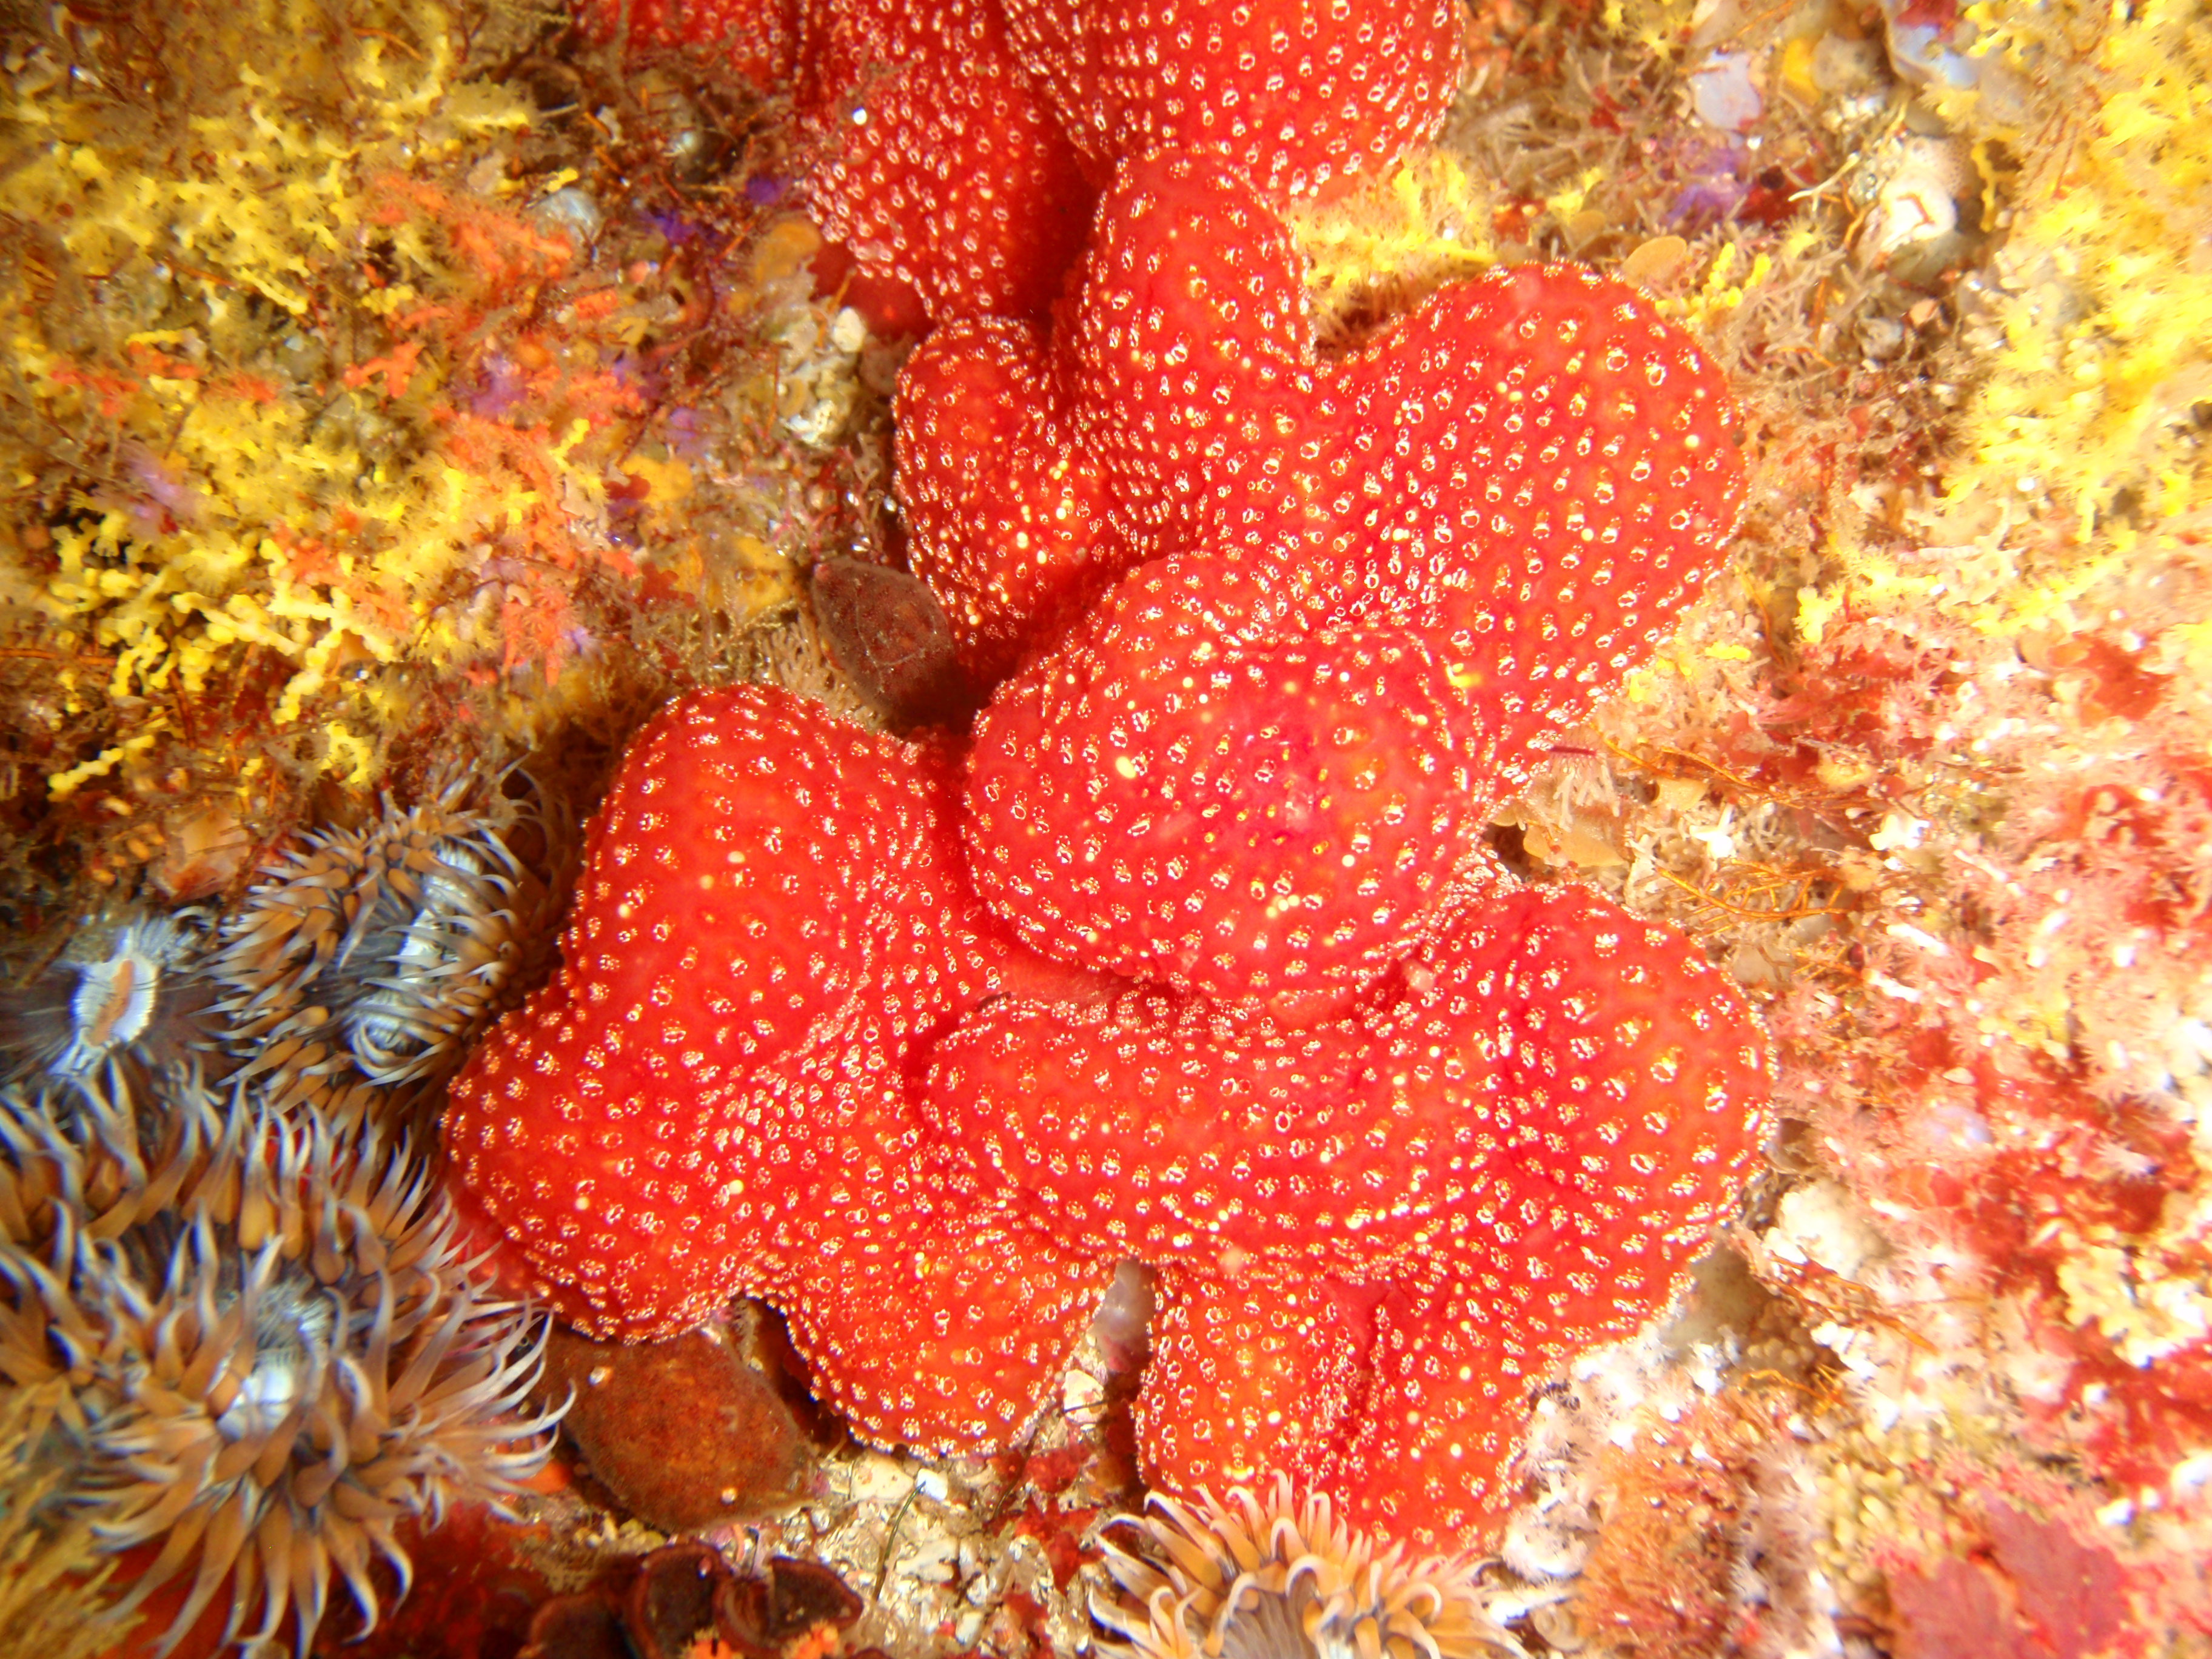 Colonial ascidians at Middle Bank P2277182